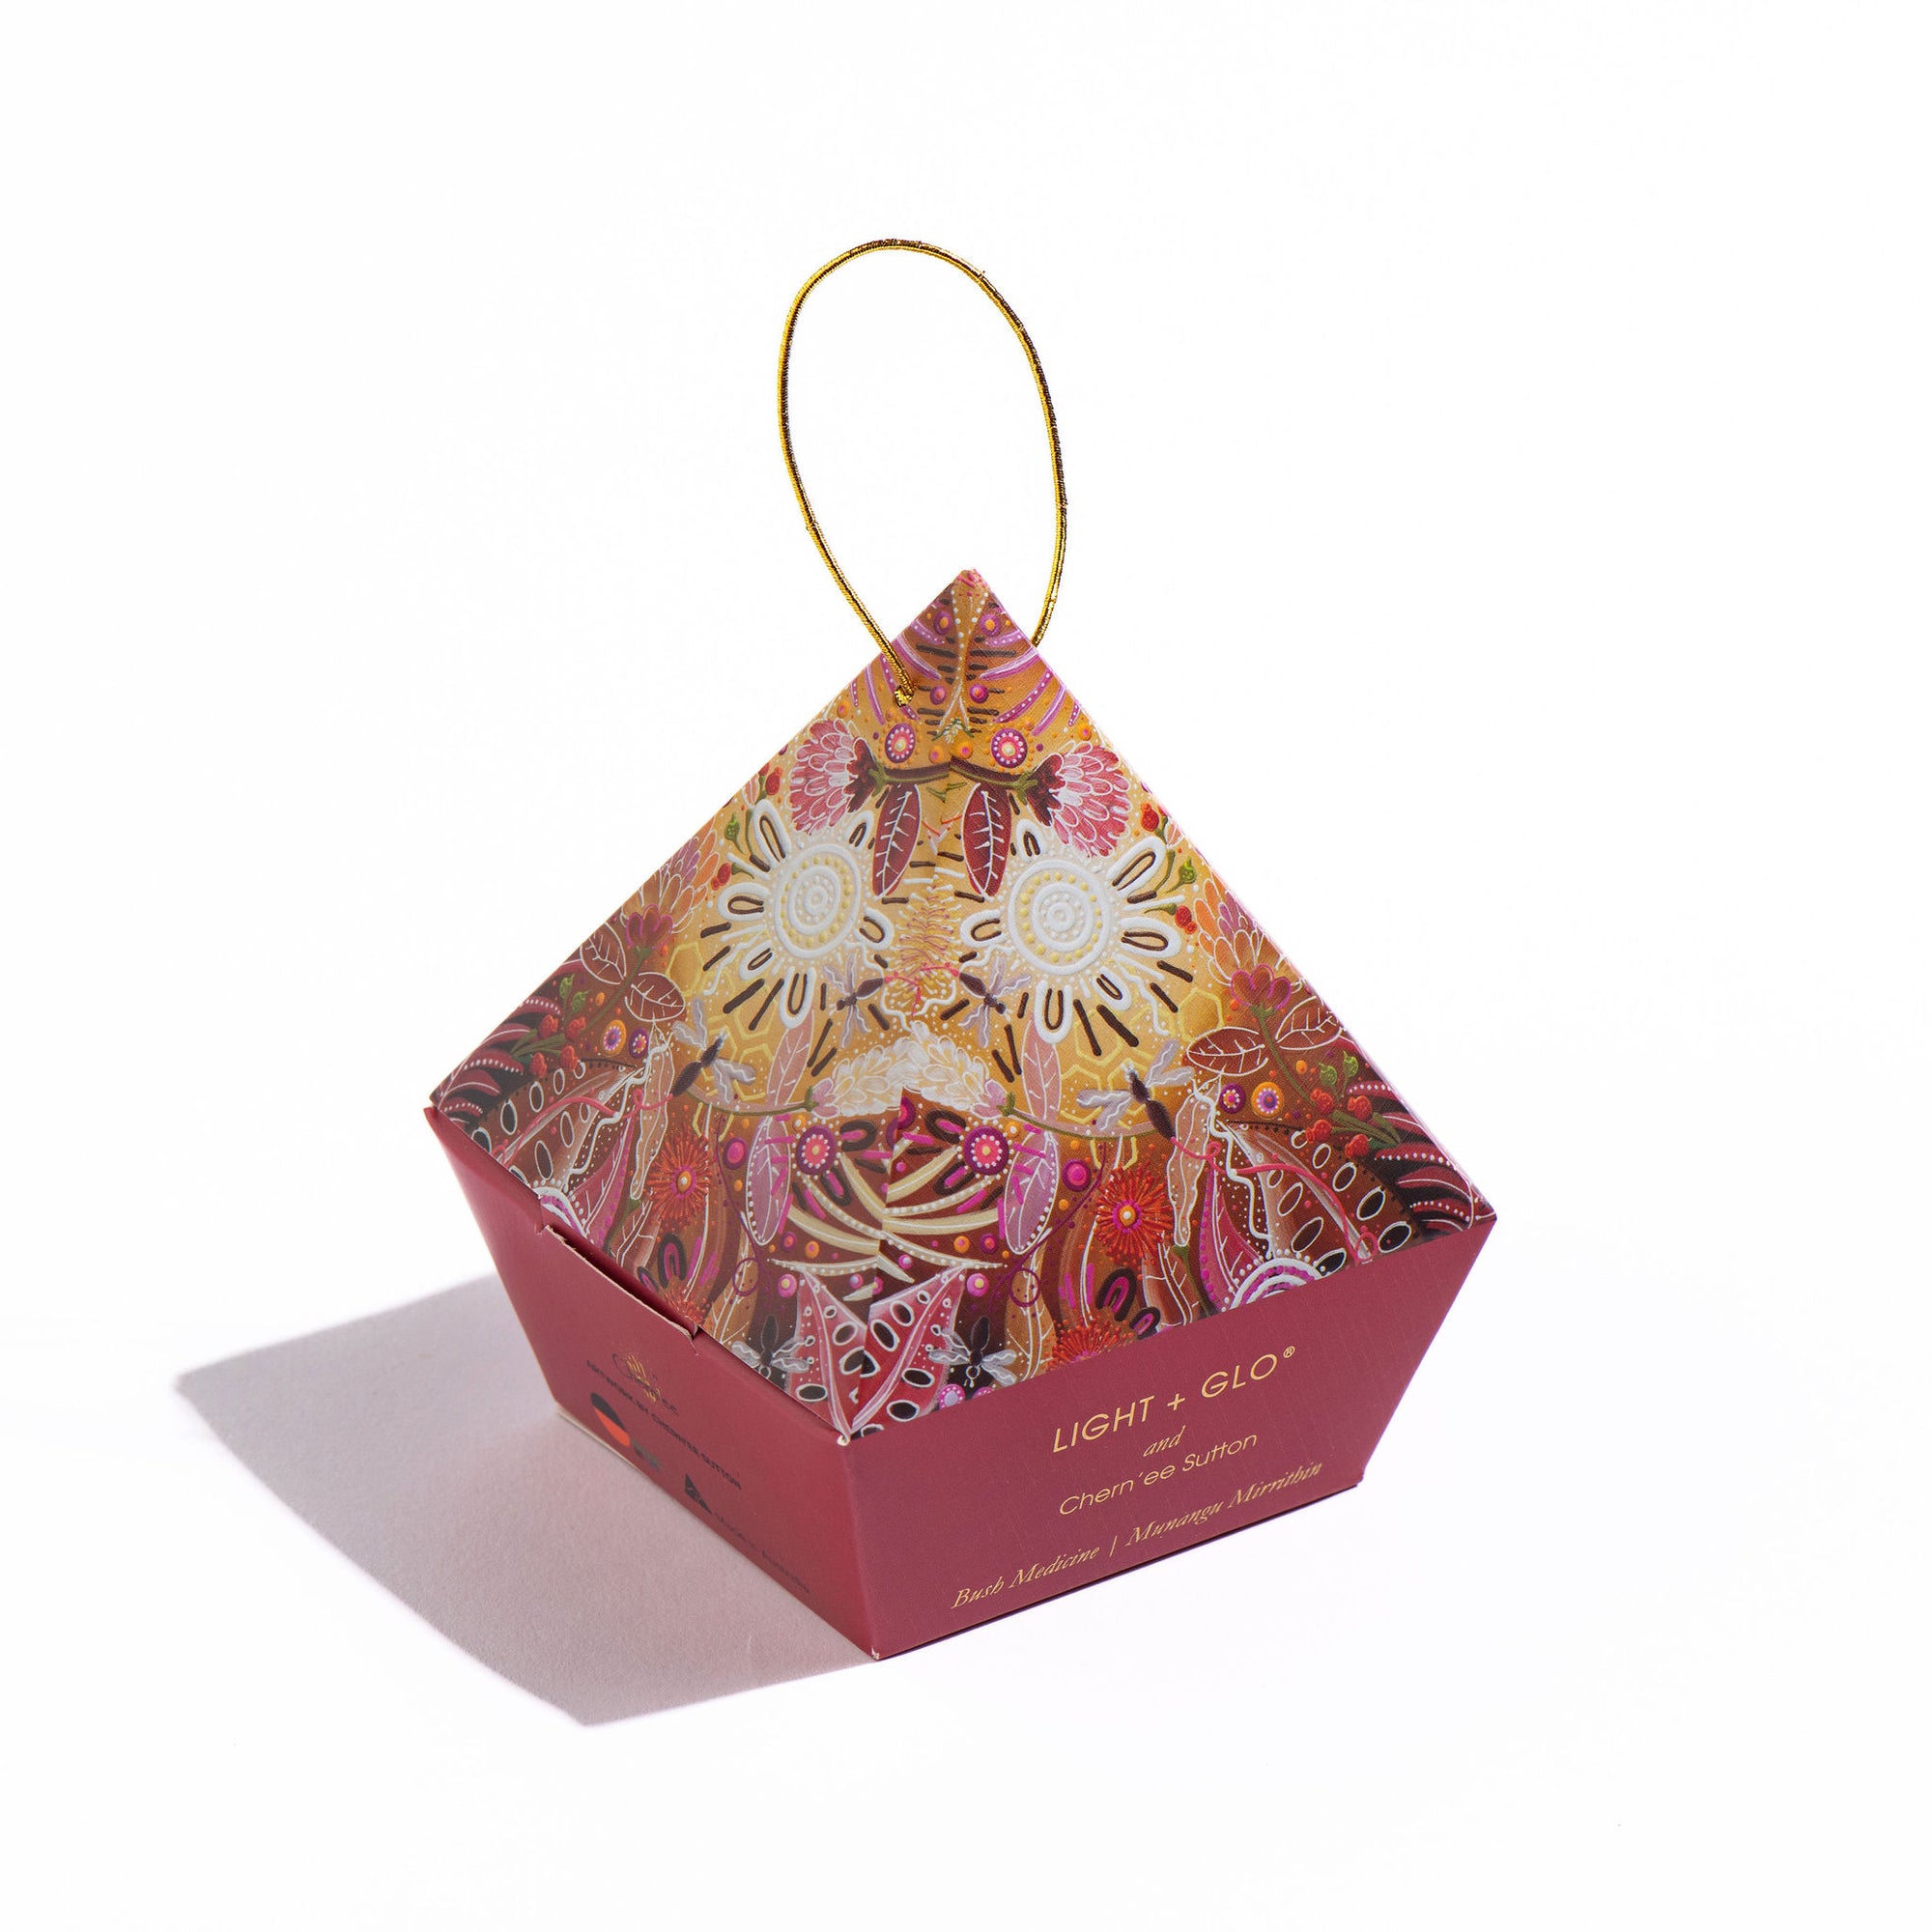 Chern'ee Sutton - Bush Medicine Bauble Limited Edition Candle | Luxury Candles & Home Fragrances by Light + Glo